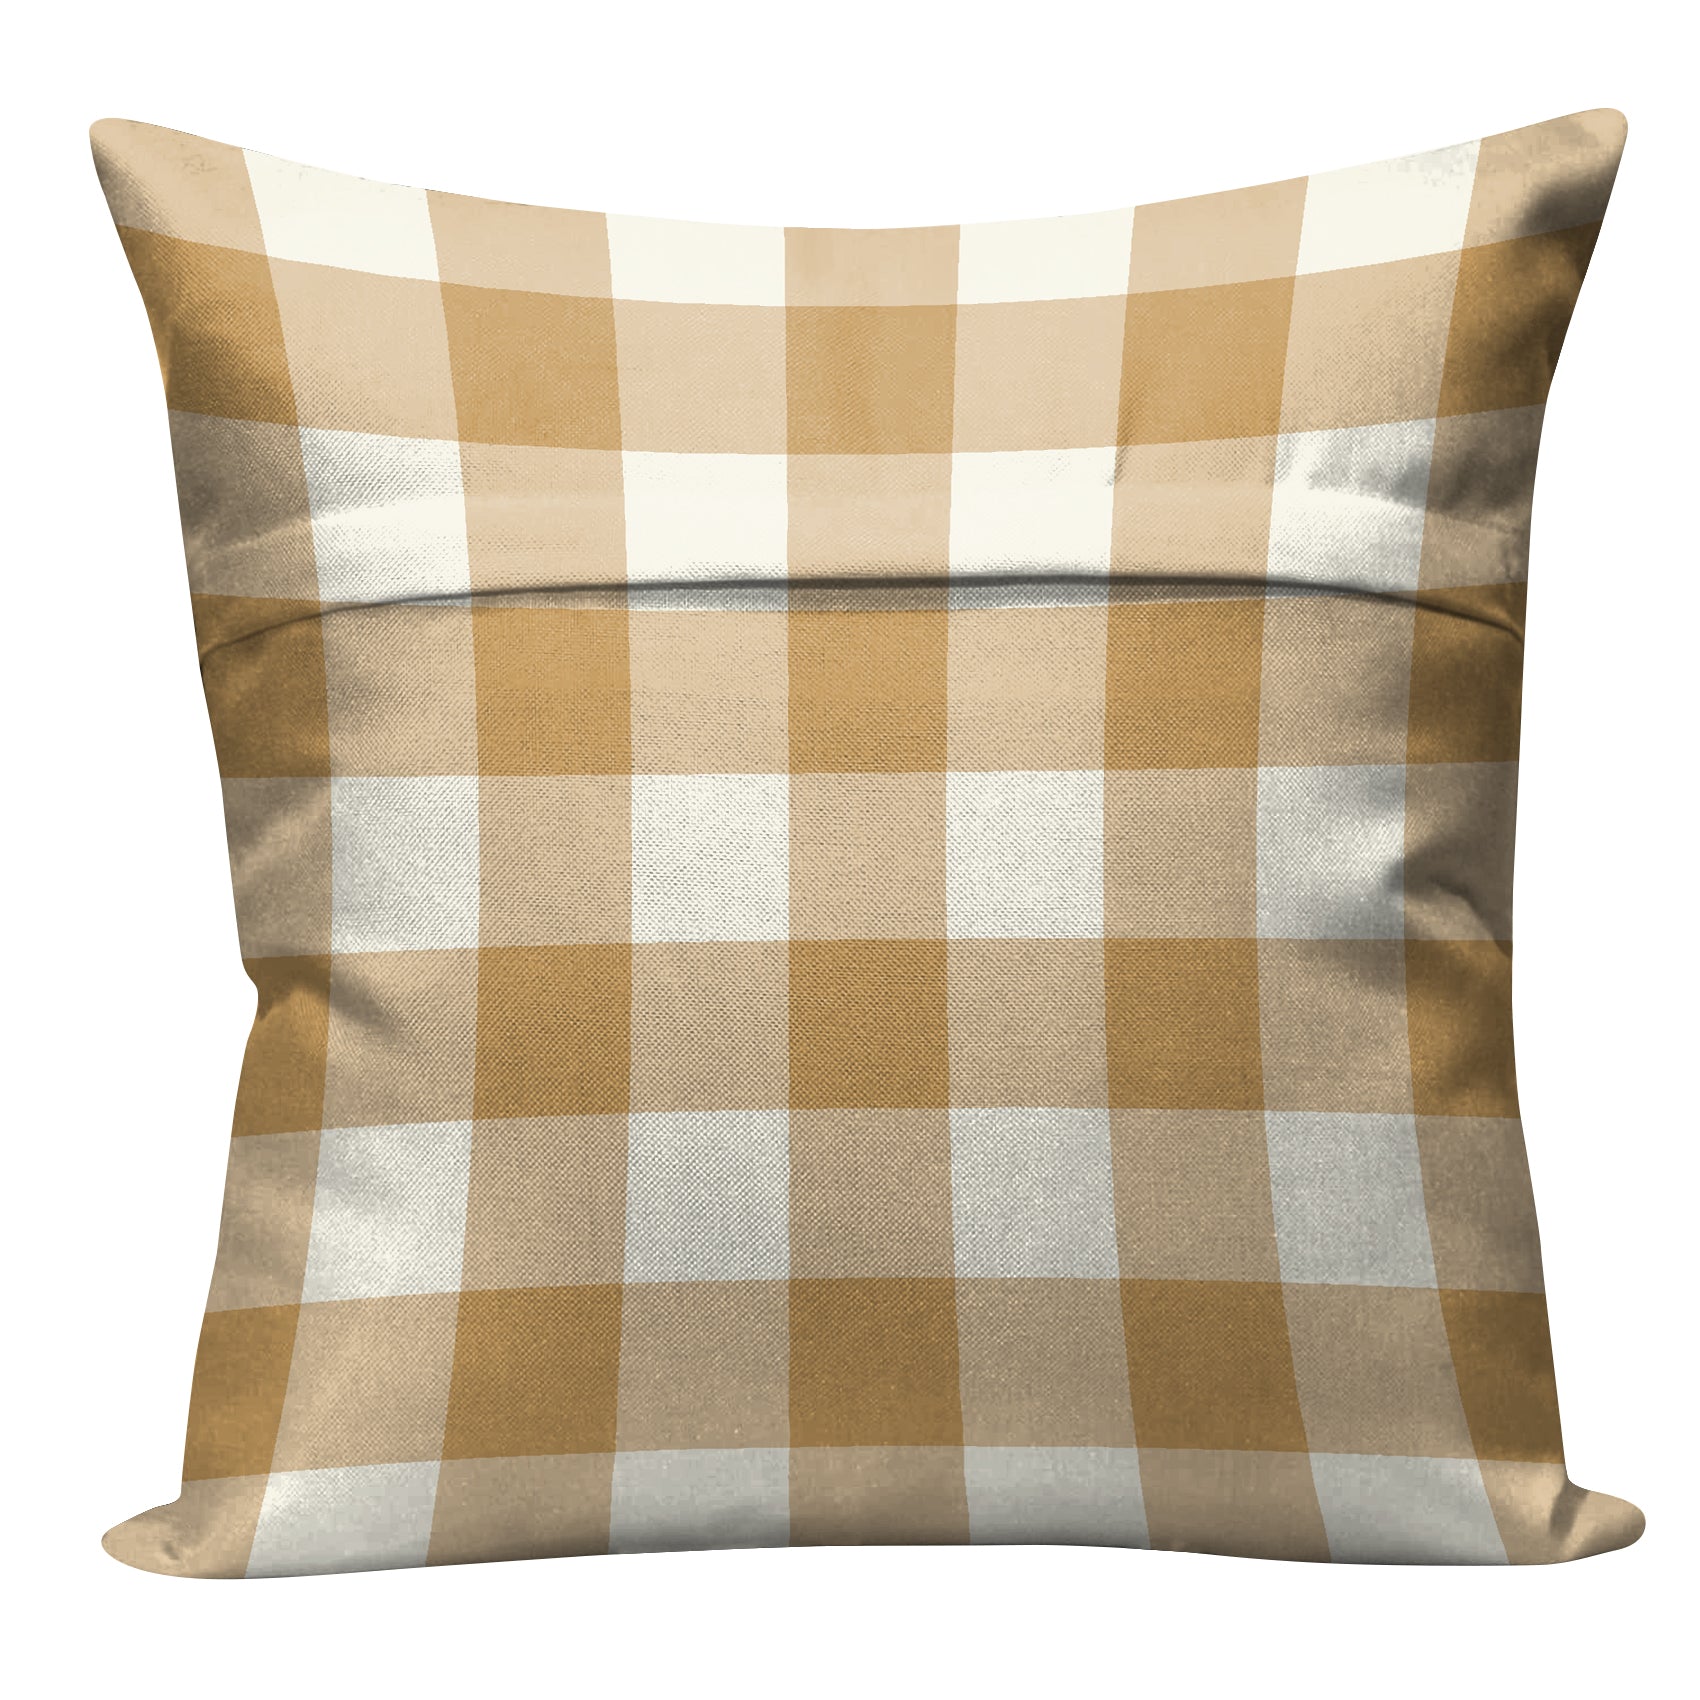 SPRING GALLERY BIG CHECK SAND BROWN (16X16 INCH) DIGITAL PRINTED CUSHION COVER